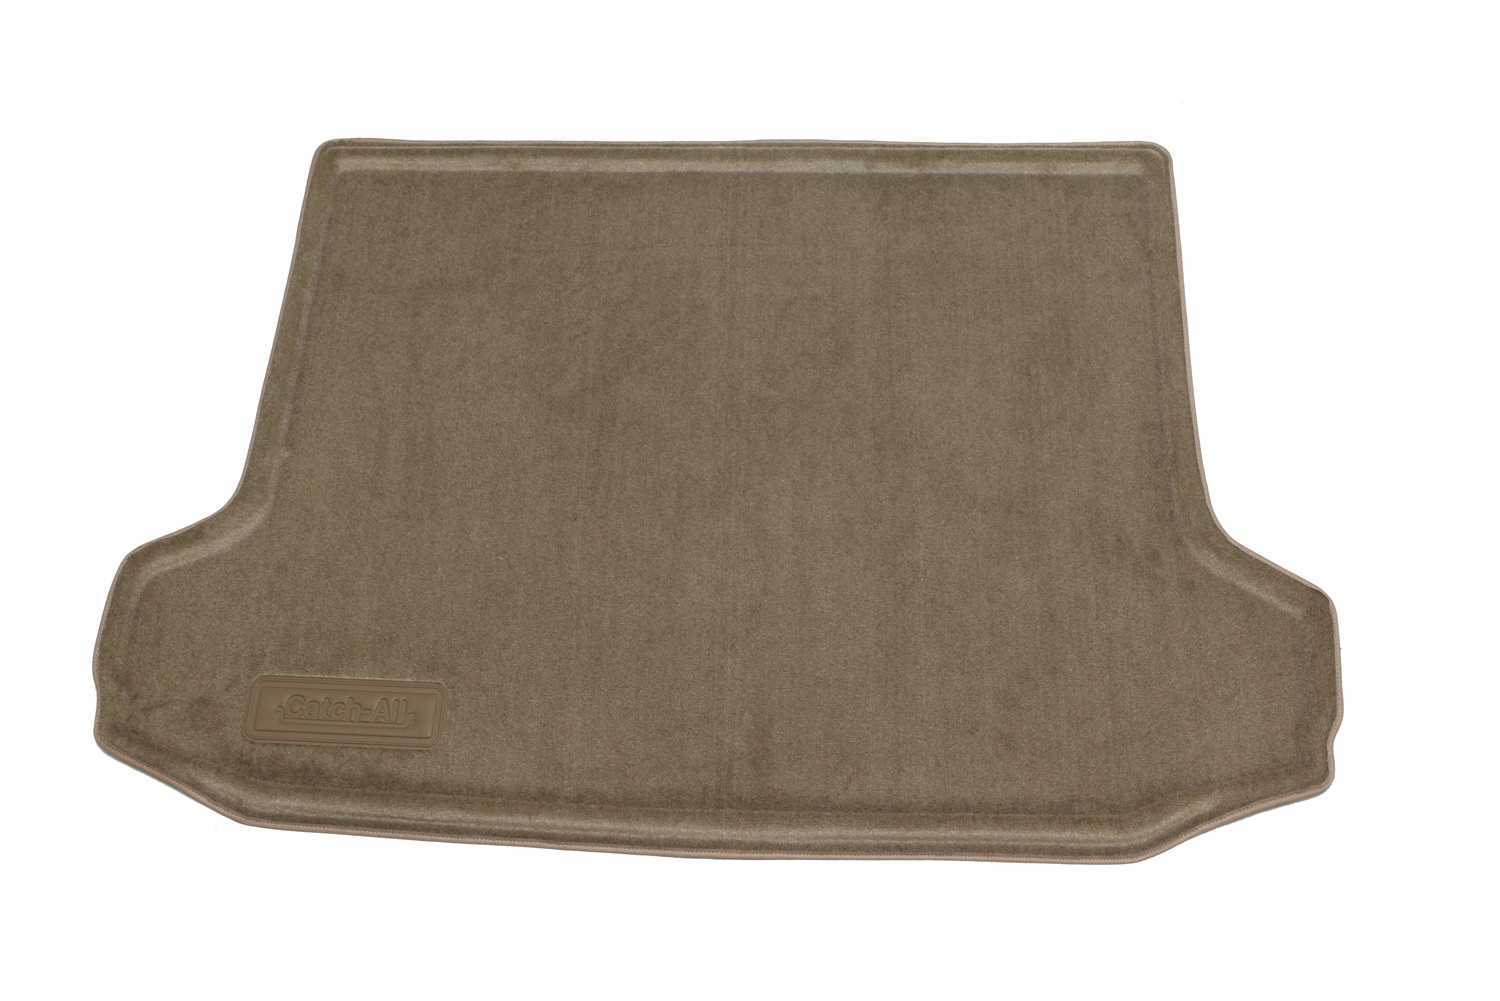 Nifty Nifty 611439 Catch-All; Premium Floor Protection-Cargo Mat Fits 00 Tahoe Yukon